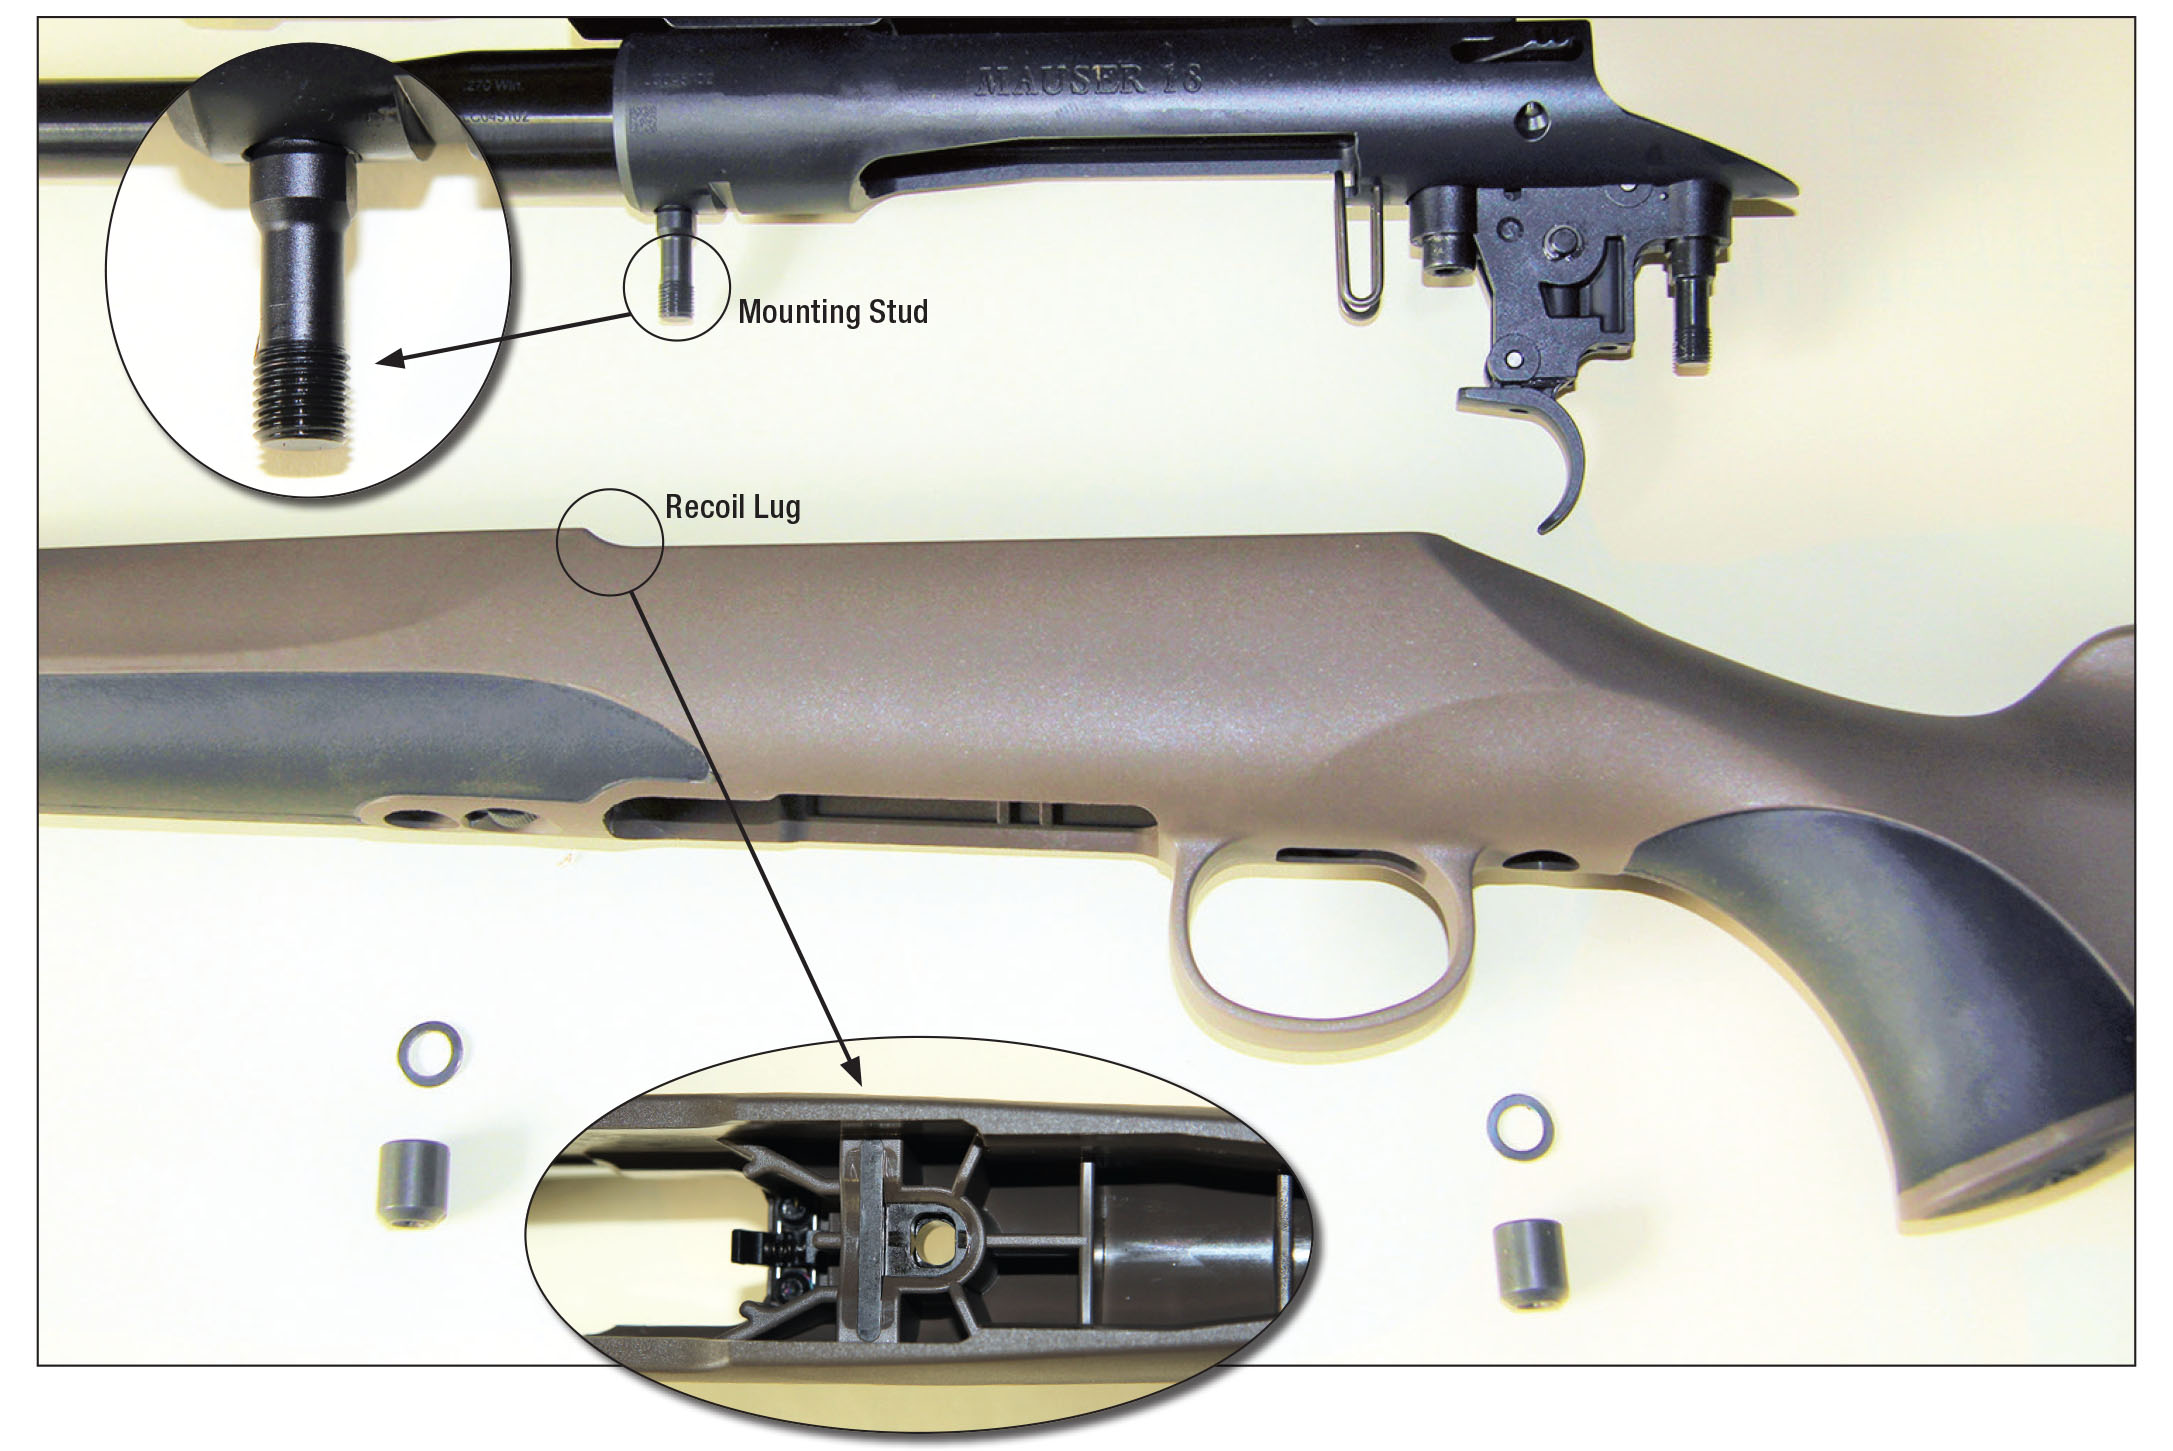 Mauser’s M18 Savanna does not hold a conventional recoil-lug system. Two threaded studs are anchored to the action, pushed through the stock and secured with nuts from below. A steel pillar and steel plate molded into the stock create the recoil lug.